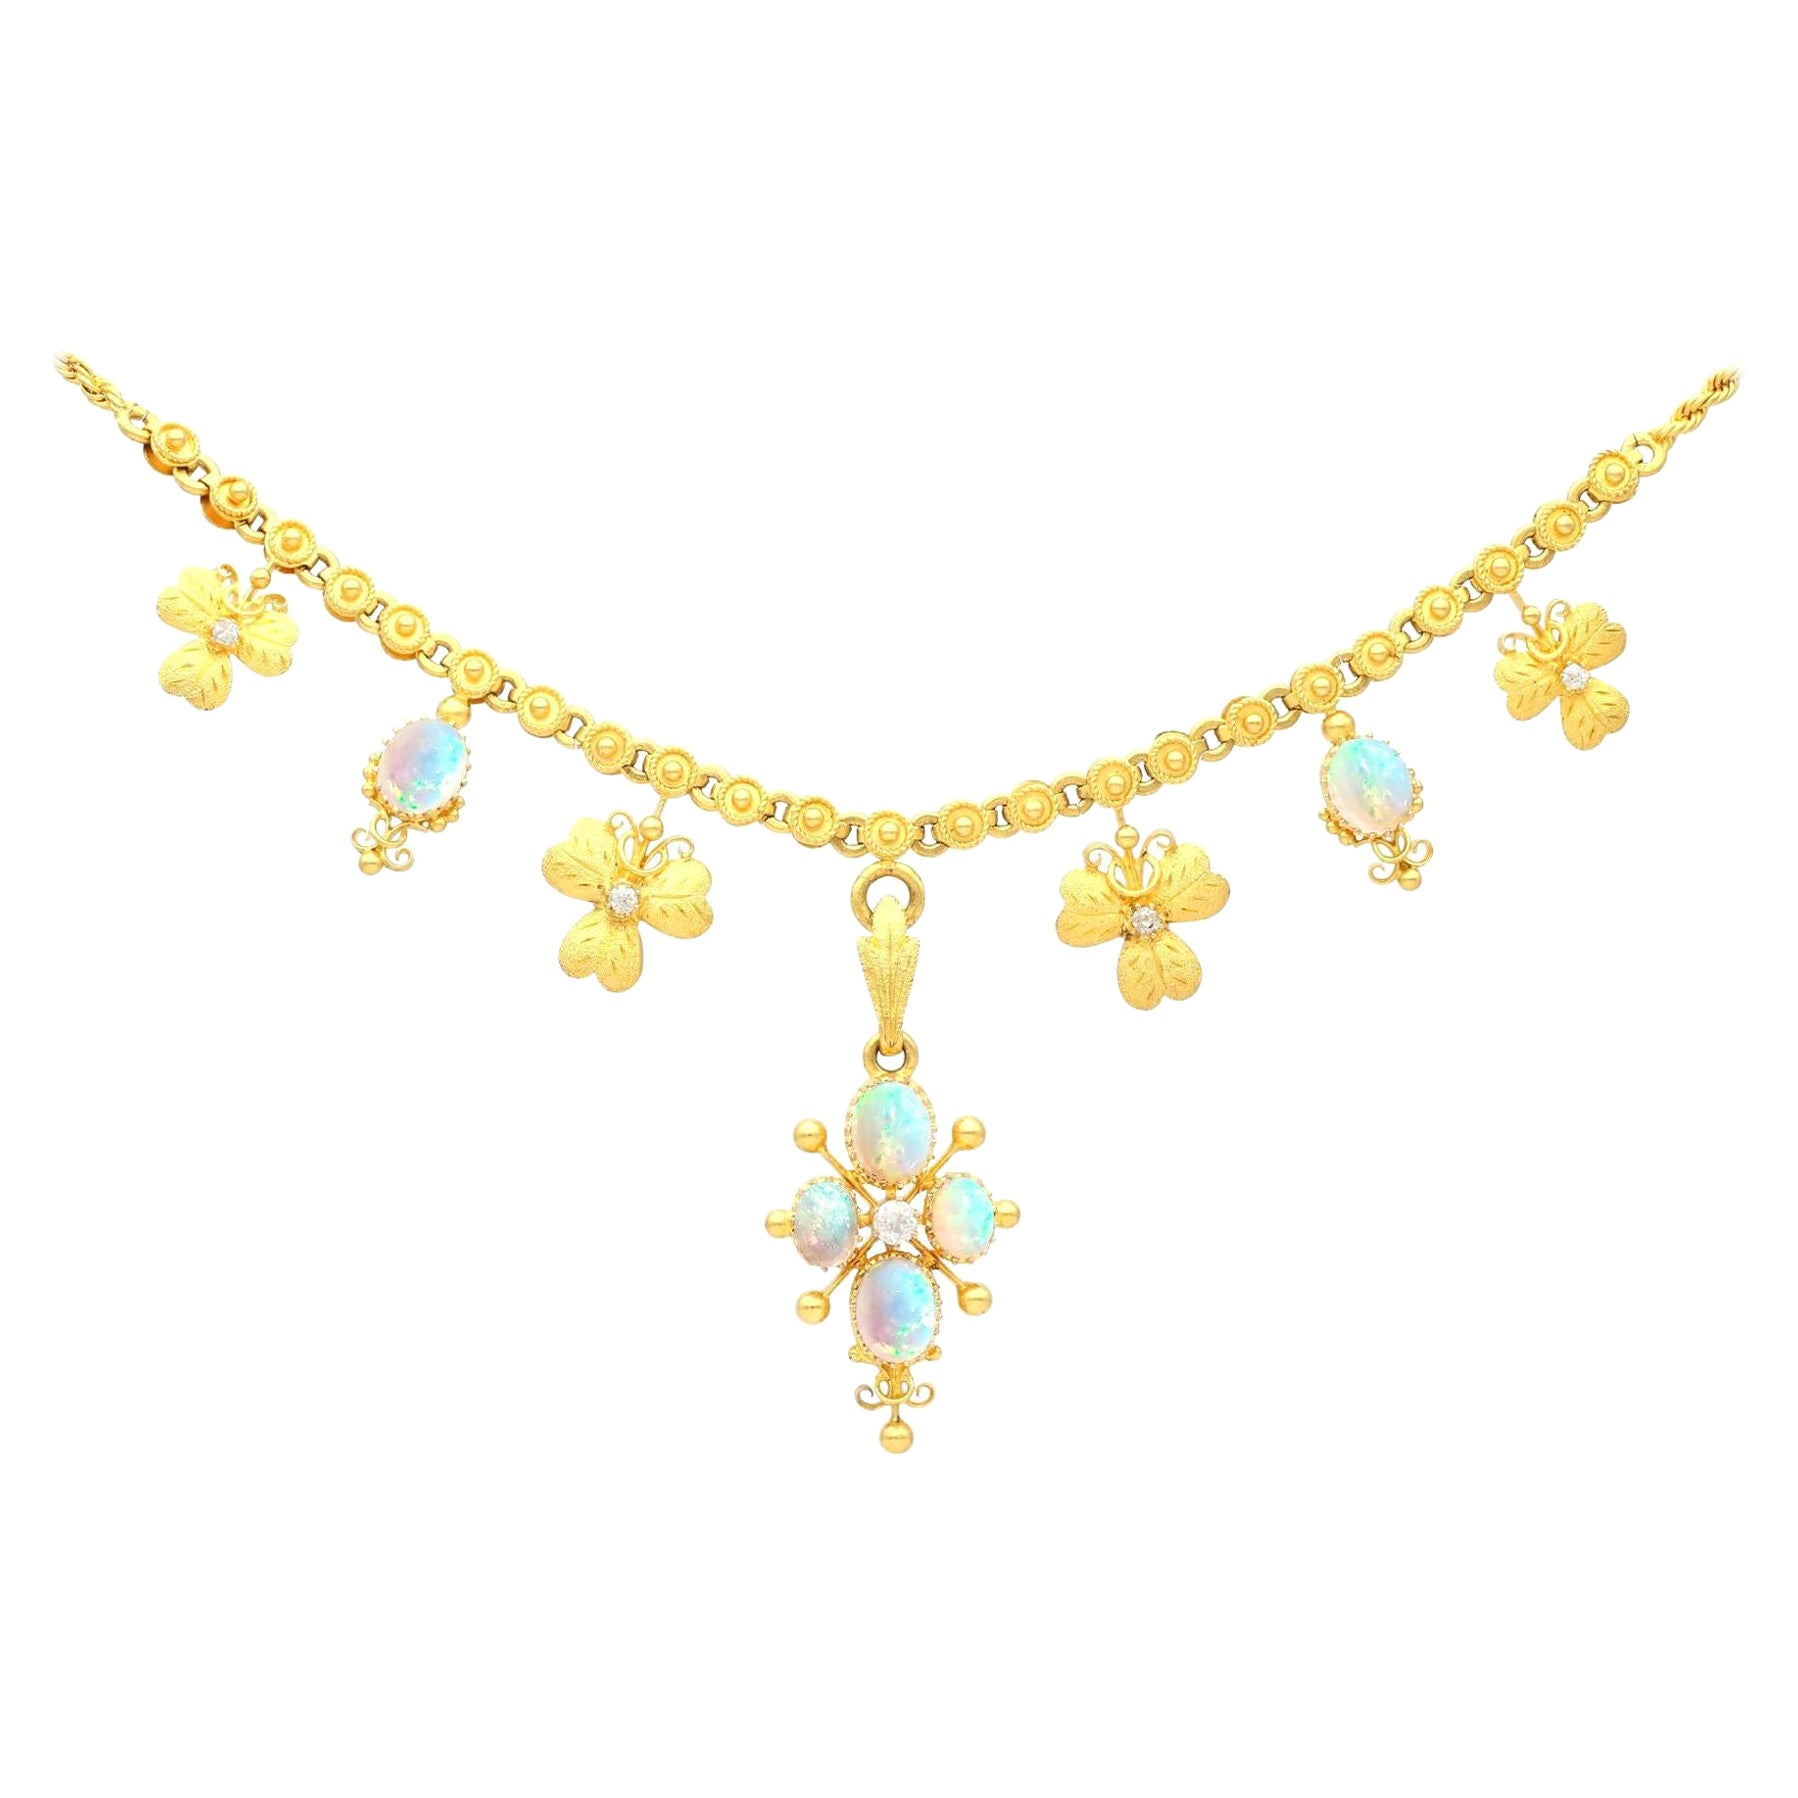 Antique 3.45 Carat Opal and Diamond 22k Yellow Gold Necklace, Circa 1890 For Sale